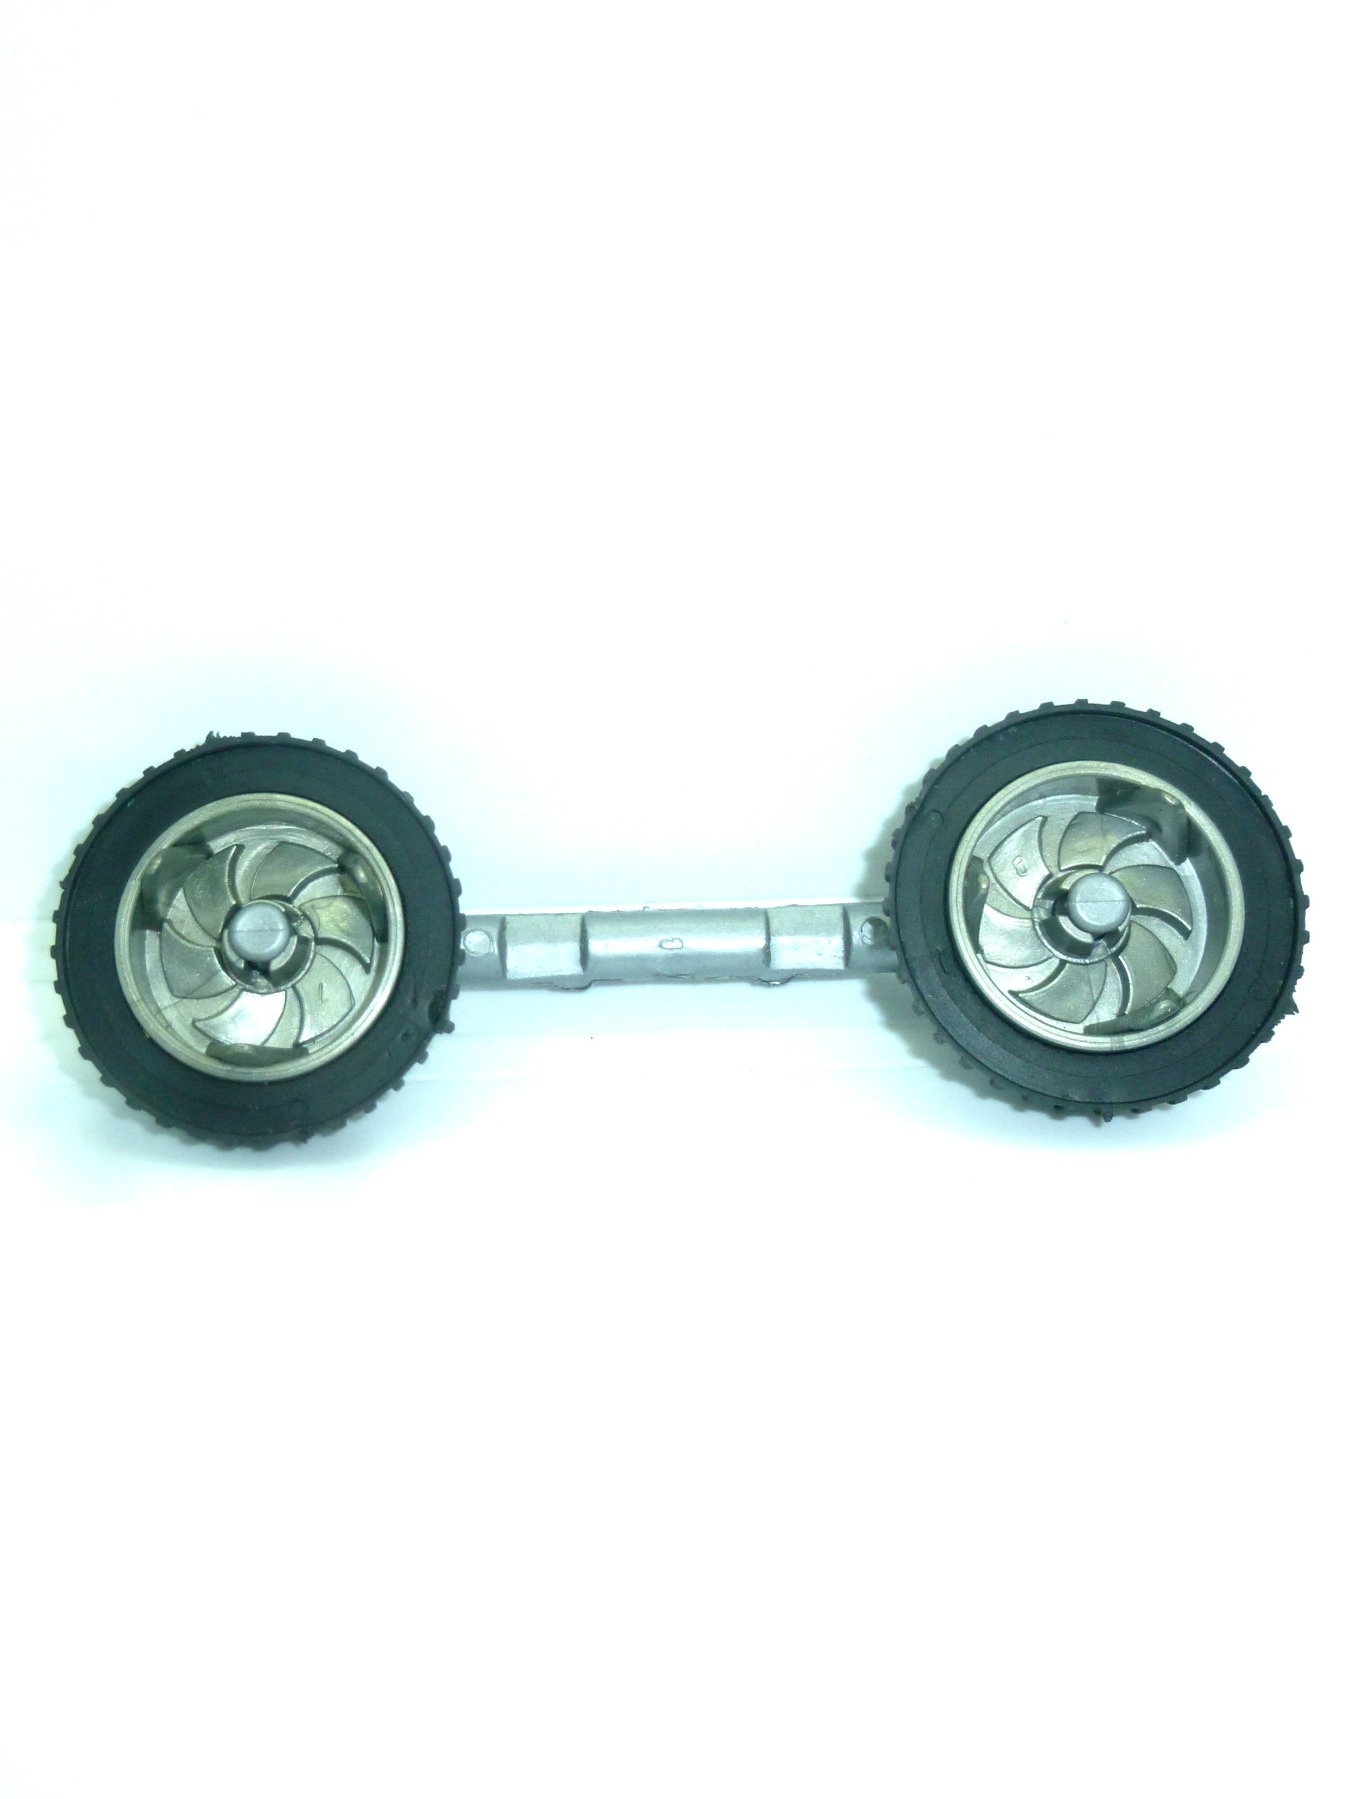 Bullet Spare Wheels Hovercraft Accessories 2